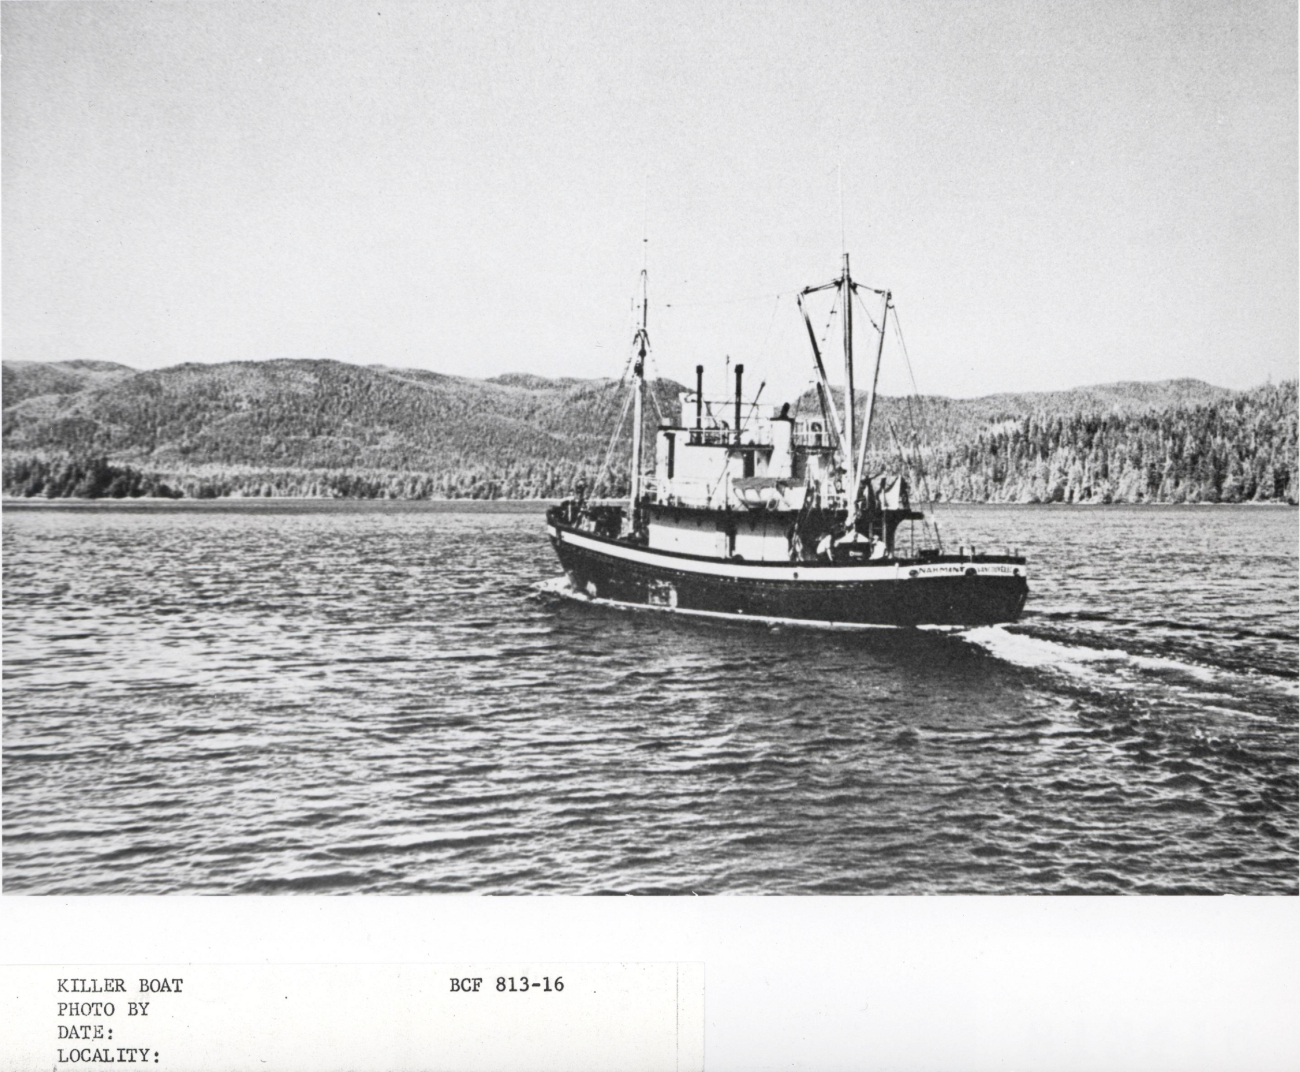 A hunter-killer boat on the way to the whaling grounds